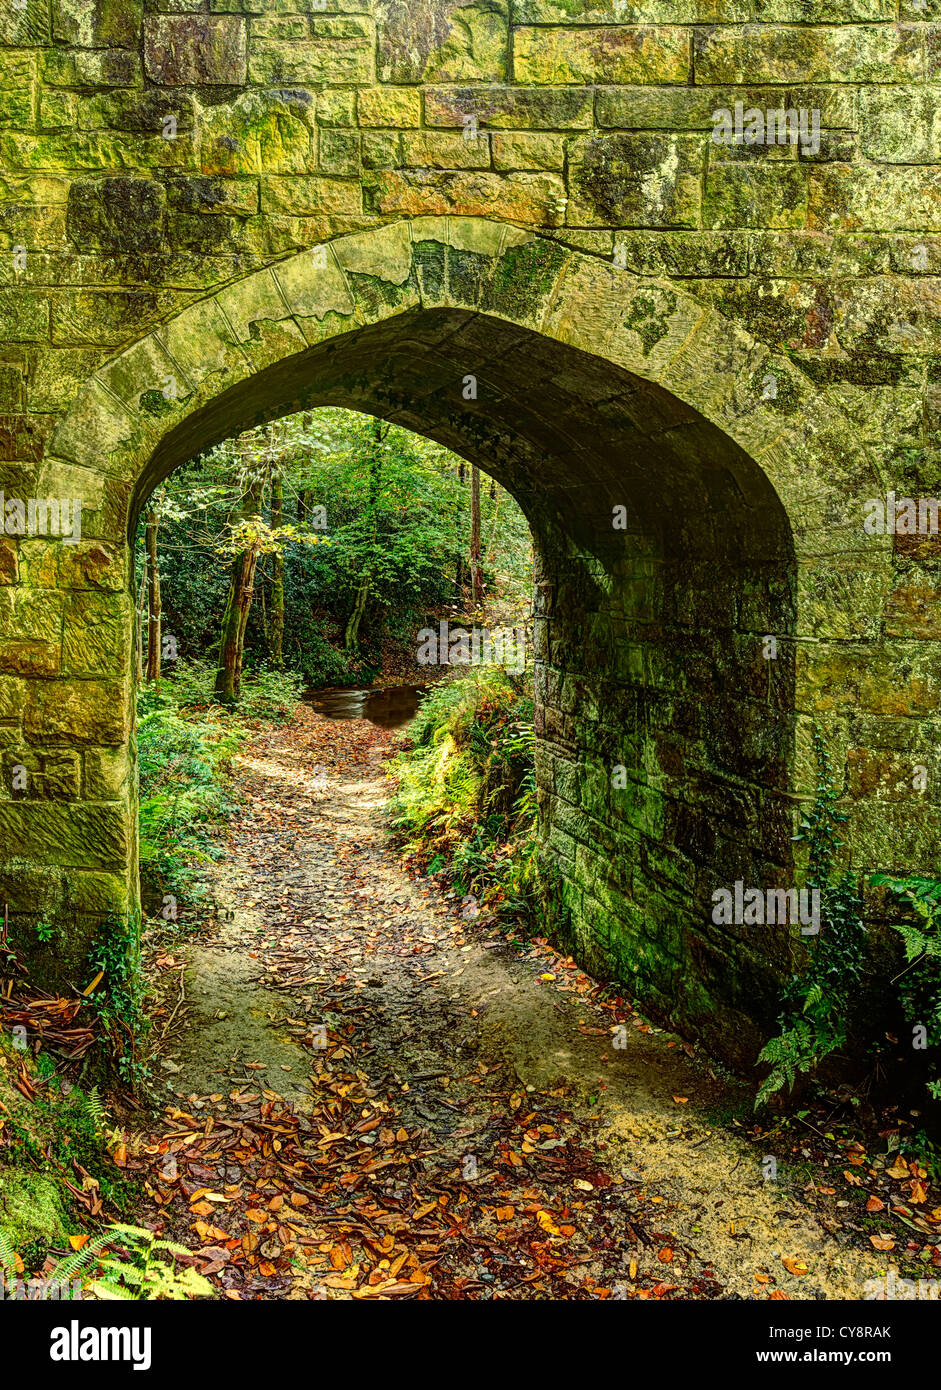 Rustic archway in forest. Stock Photo